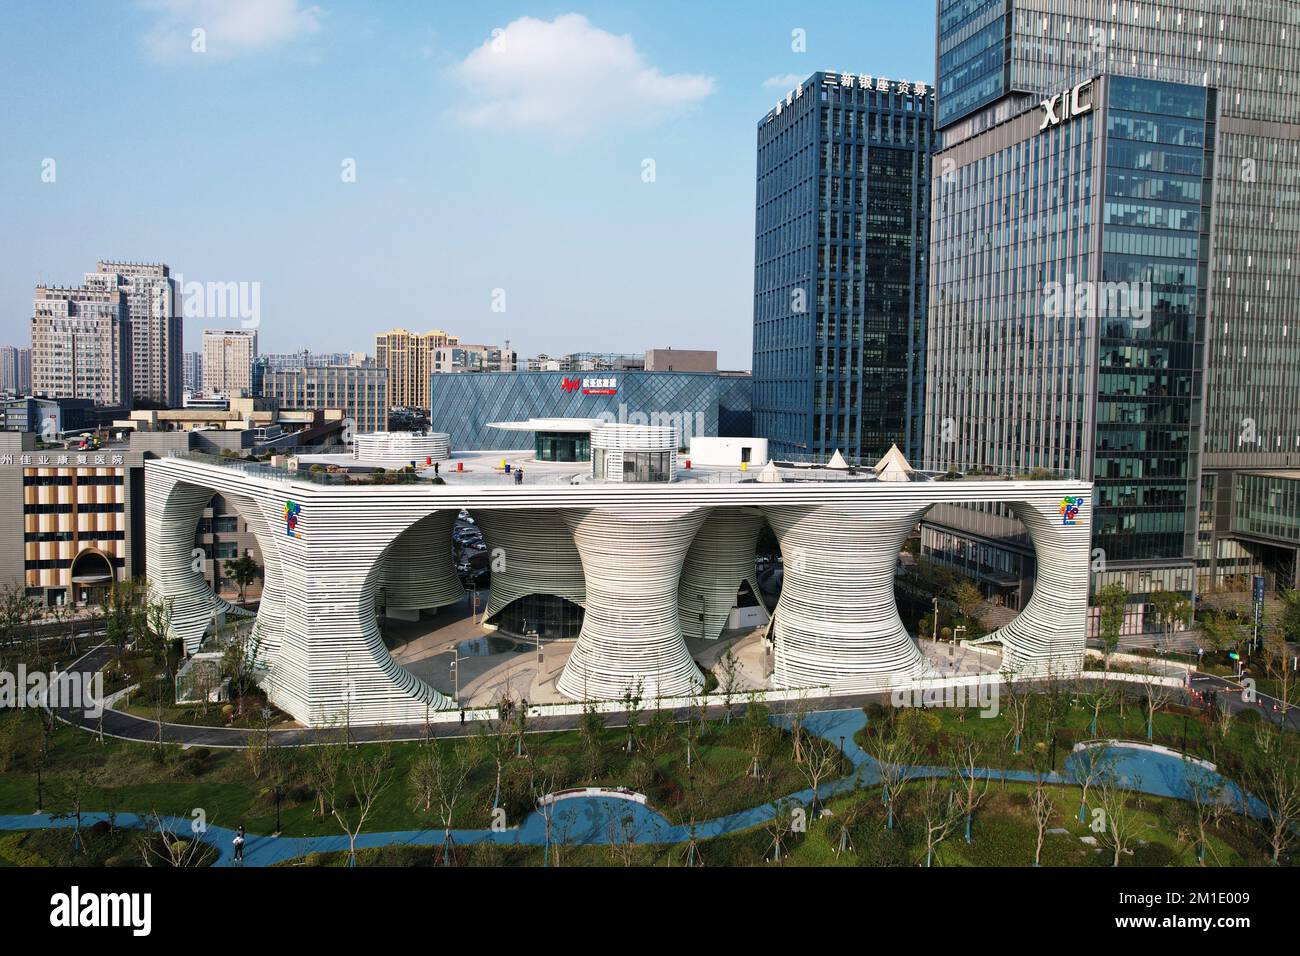 SHANGHAI, CHINA - DECEMBER 12, 2022 - A view of Dragonfly Park, the 'parking lot of the future', in Hangzhou City, Zhejiang Province, China, Dec 12, 2 Stock Photo